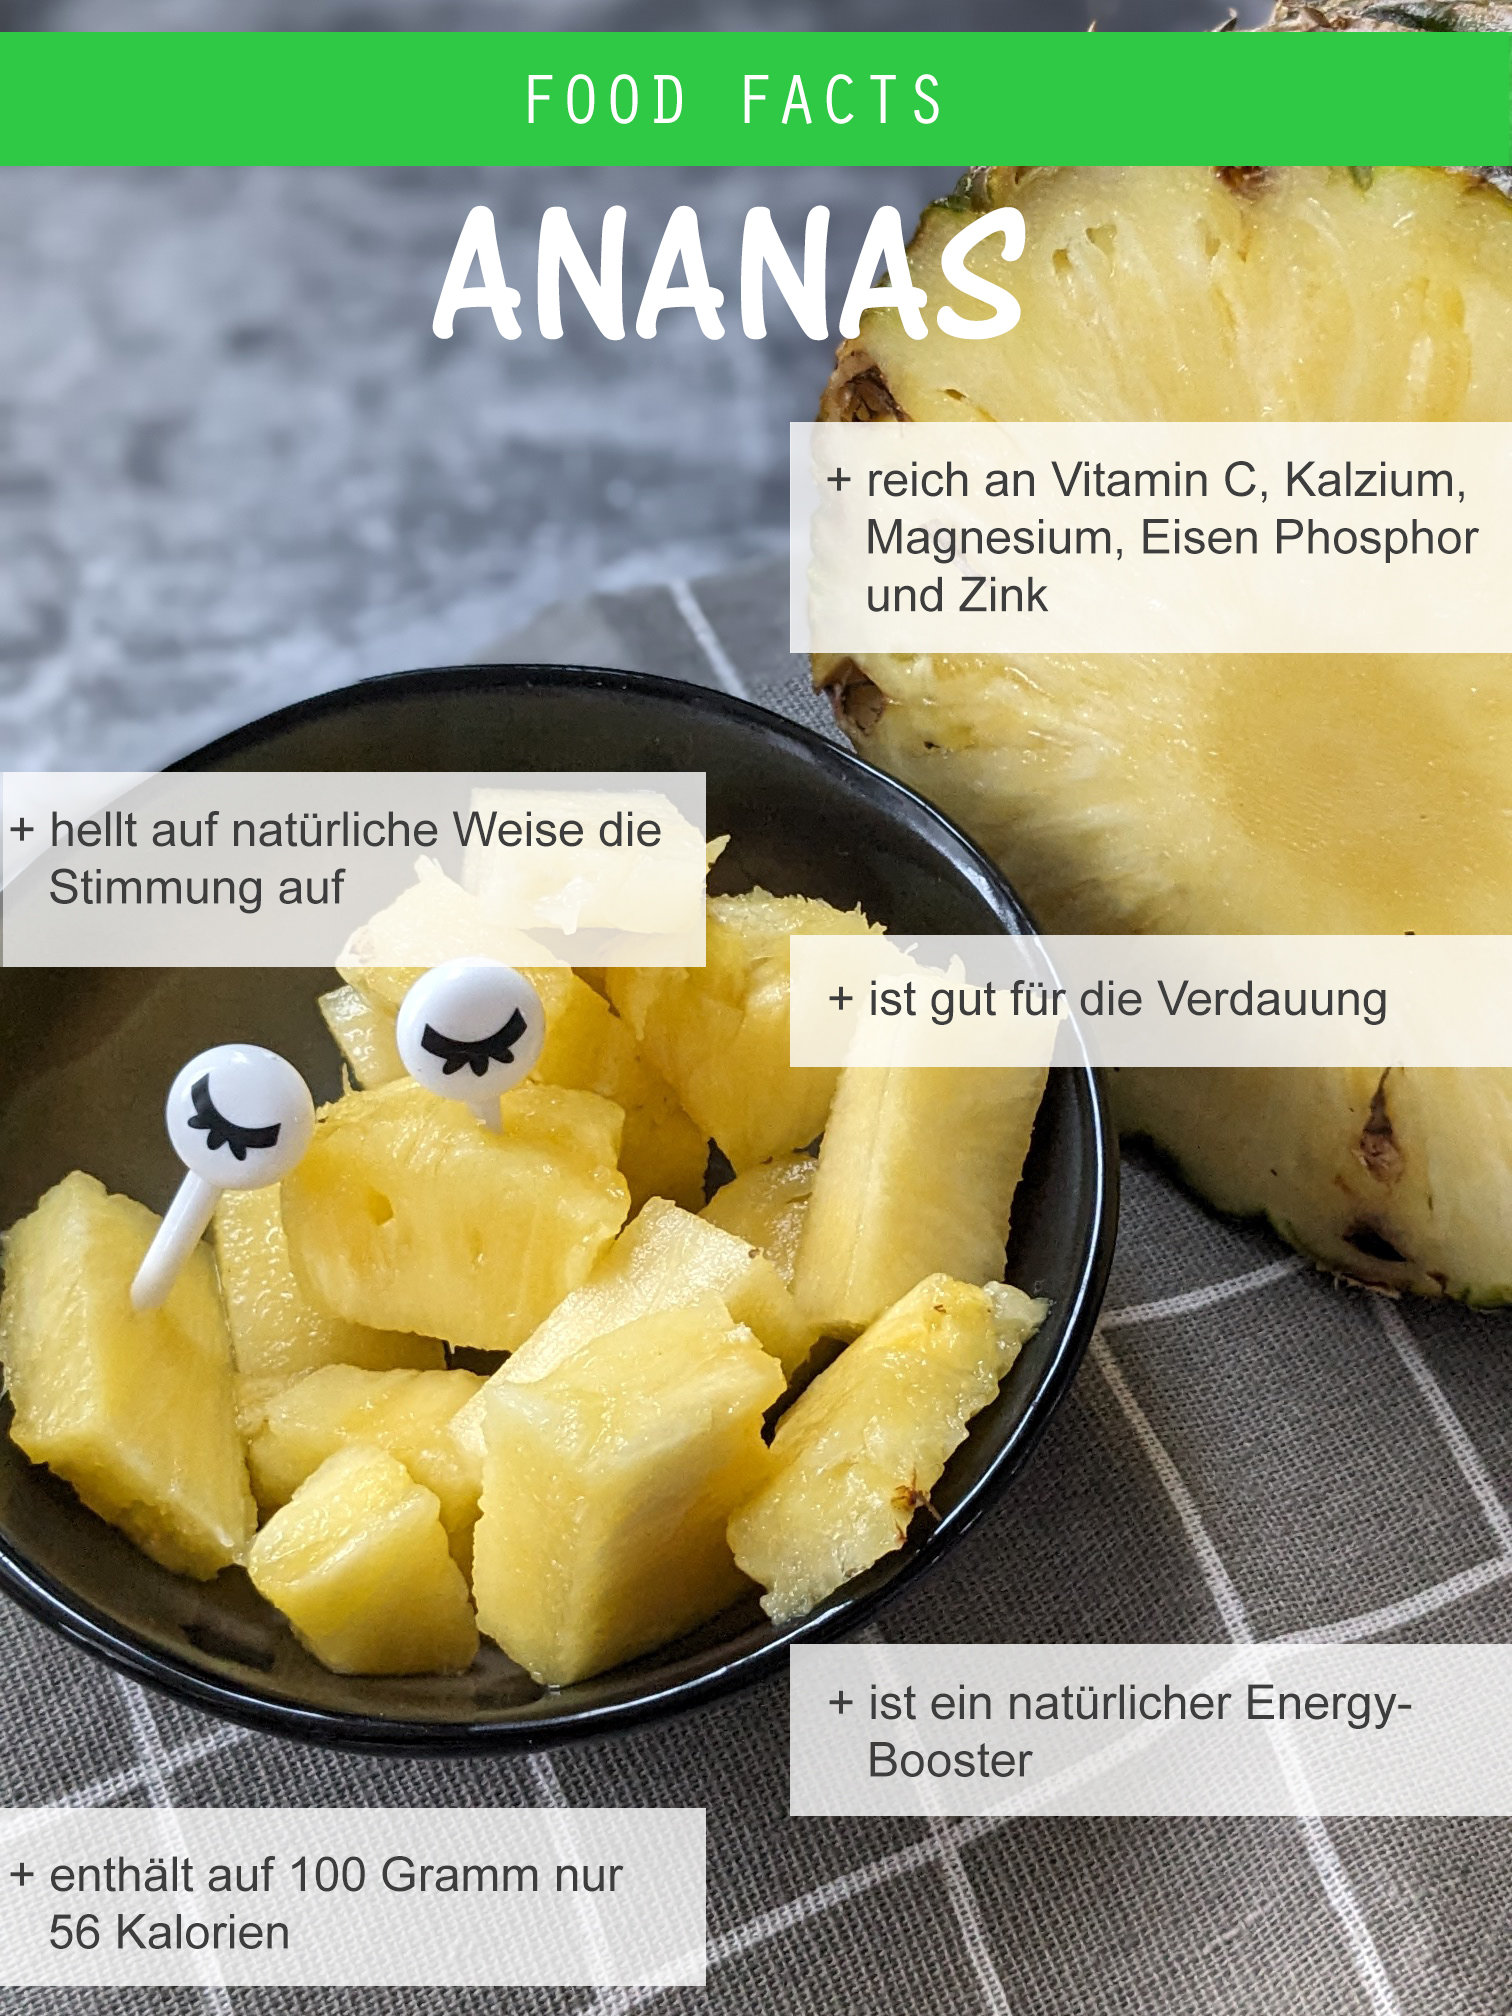 Food Facts Ananas